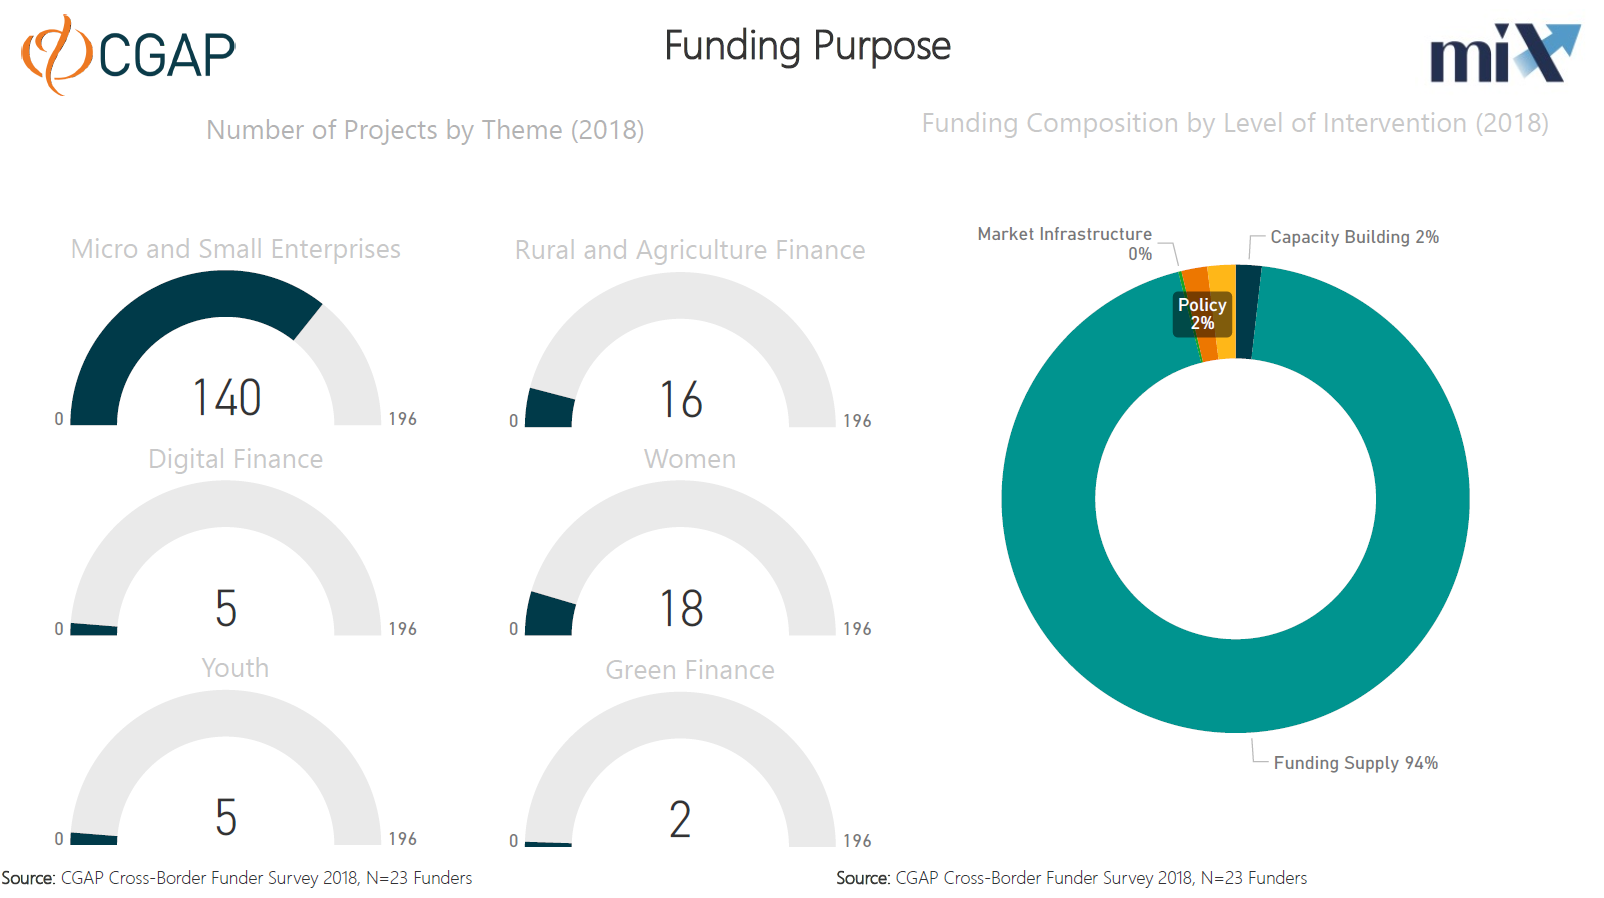 What do funders fund in Middle East and North Africa? (Themes, funding purpose)